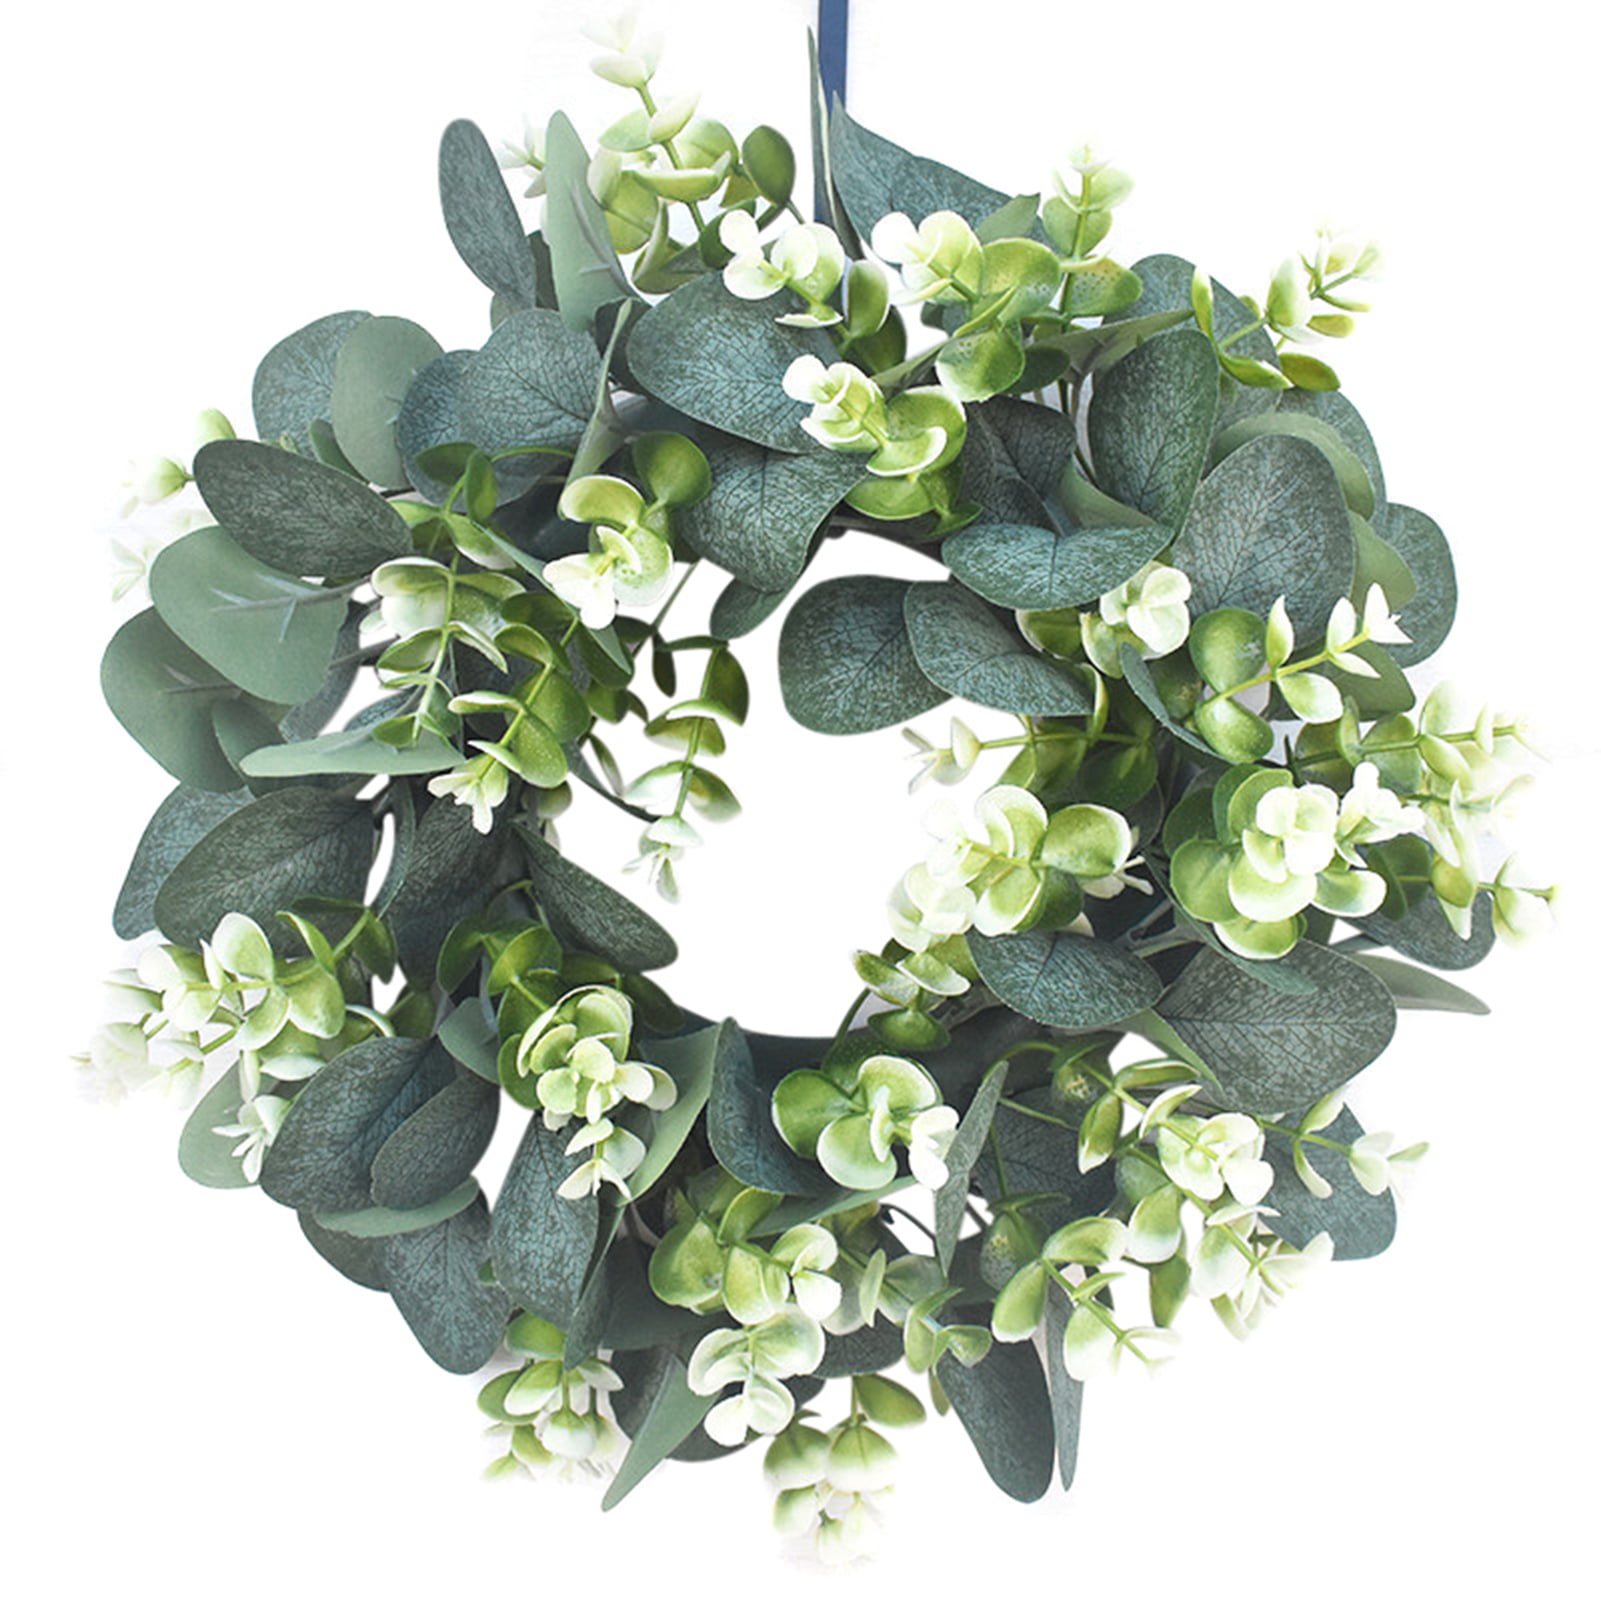 LIFEFAIR Green Eucalyptus Leaf Wreath 20 Inches Artificial Festival Celebration Wreath for Front Door Year Round